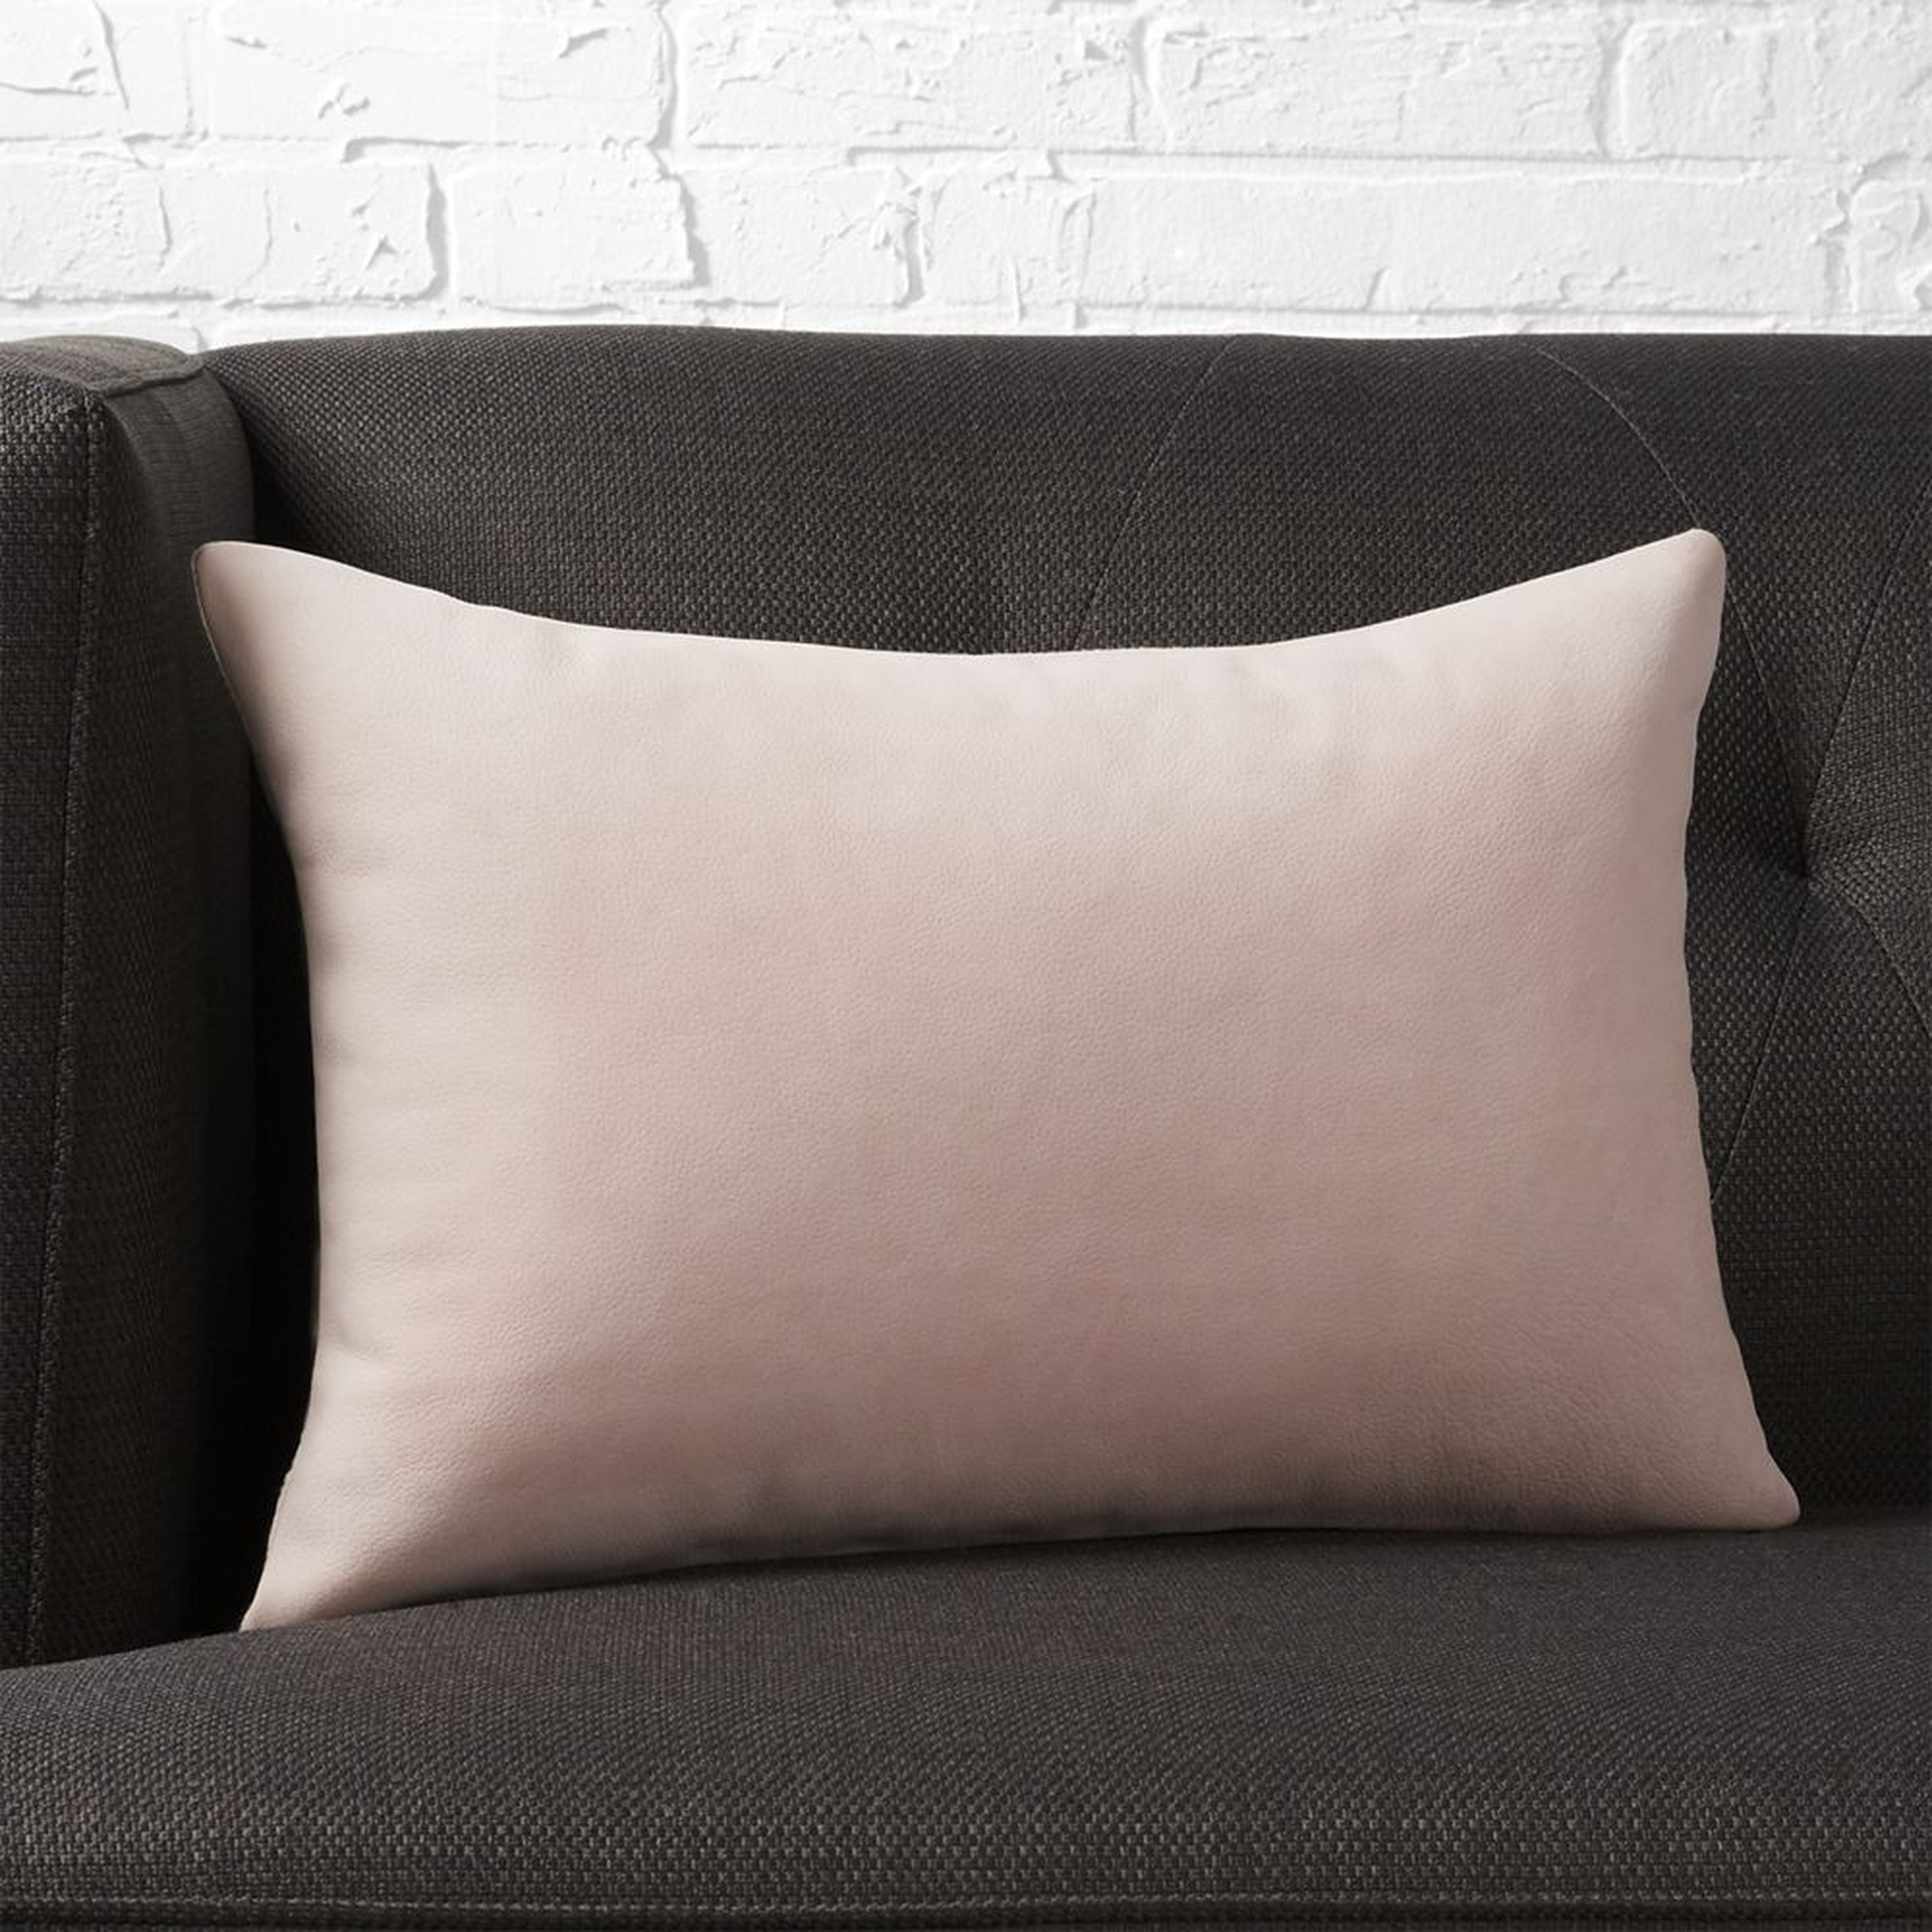 "18""x12"" loki blush leather pillow with feather-down insert" - CB2